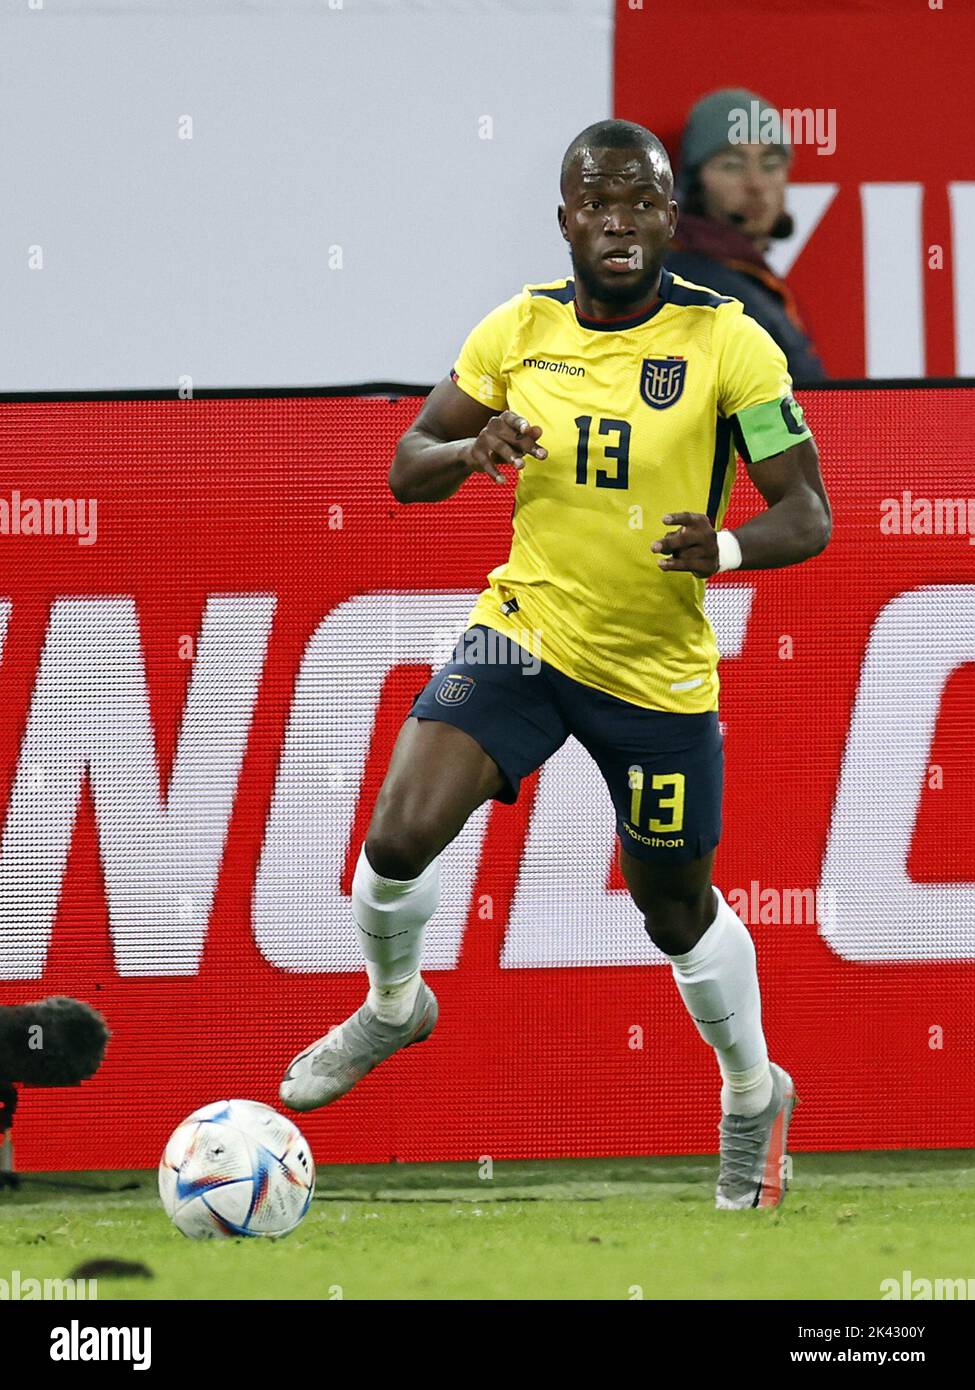 DUSSELDORF - Enner Valencia of Ecuador during the international friendly match between Japan and Ecuador at the Dusseldorf Arena on September 27, 2022 in Dusseldorf, Germany. ANP | Dutch Height | Maurice van Steen Stock Photo